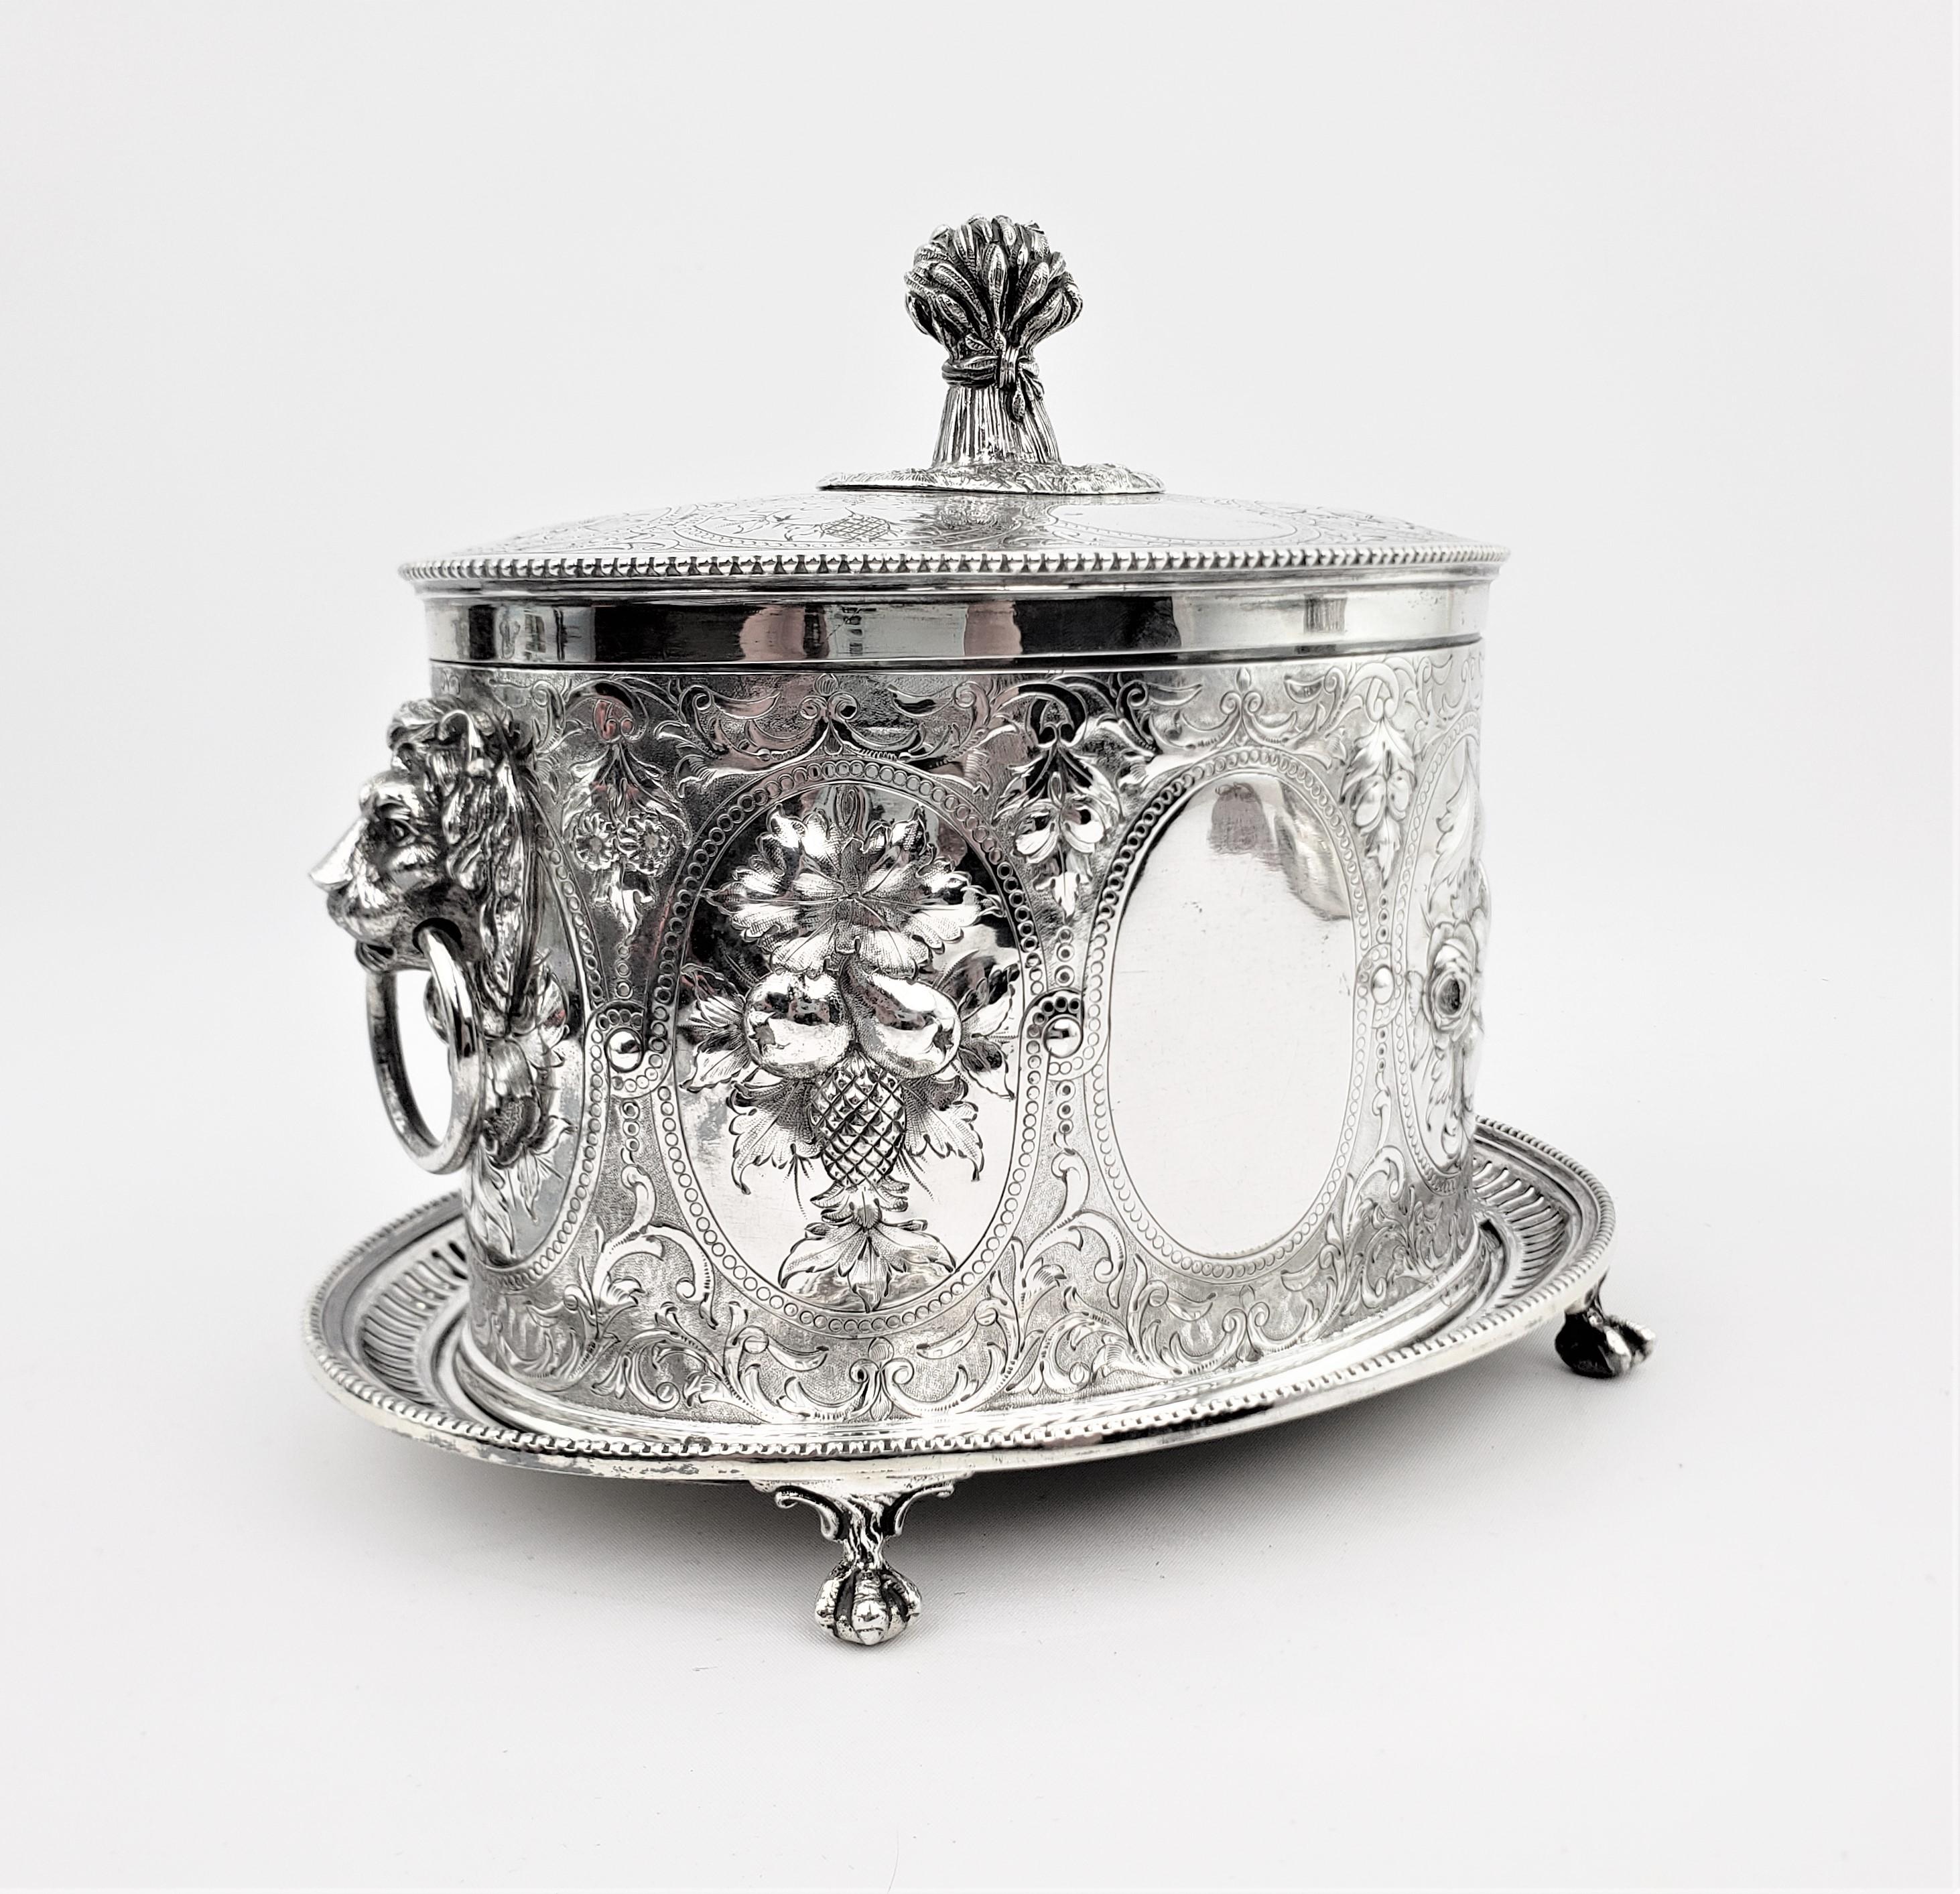 This antique oval shaped and silver plated biscuit barrel was made in England in approximately 1880 in a period Victorian style. This biscuit barrel has a central shield on both the front and back, which is surrounded by a harvest themed decoration